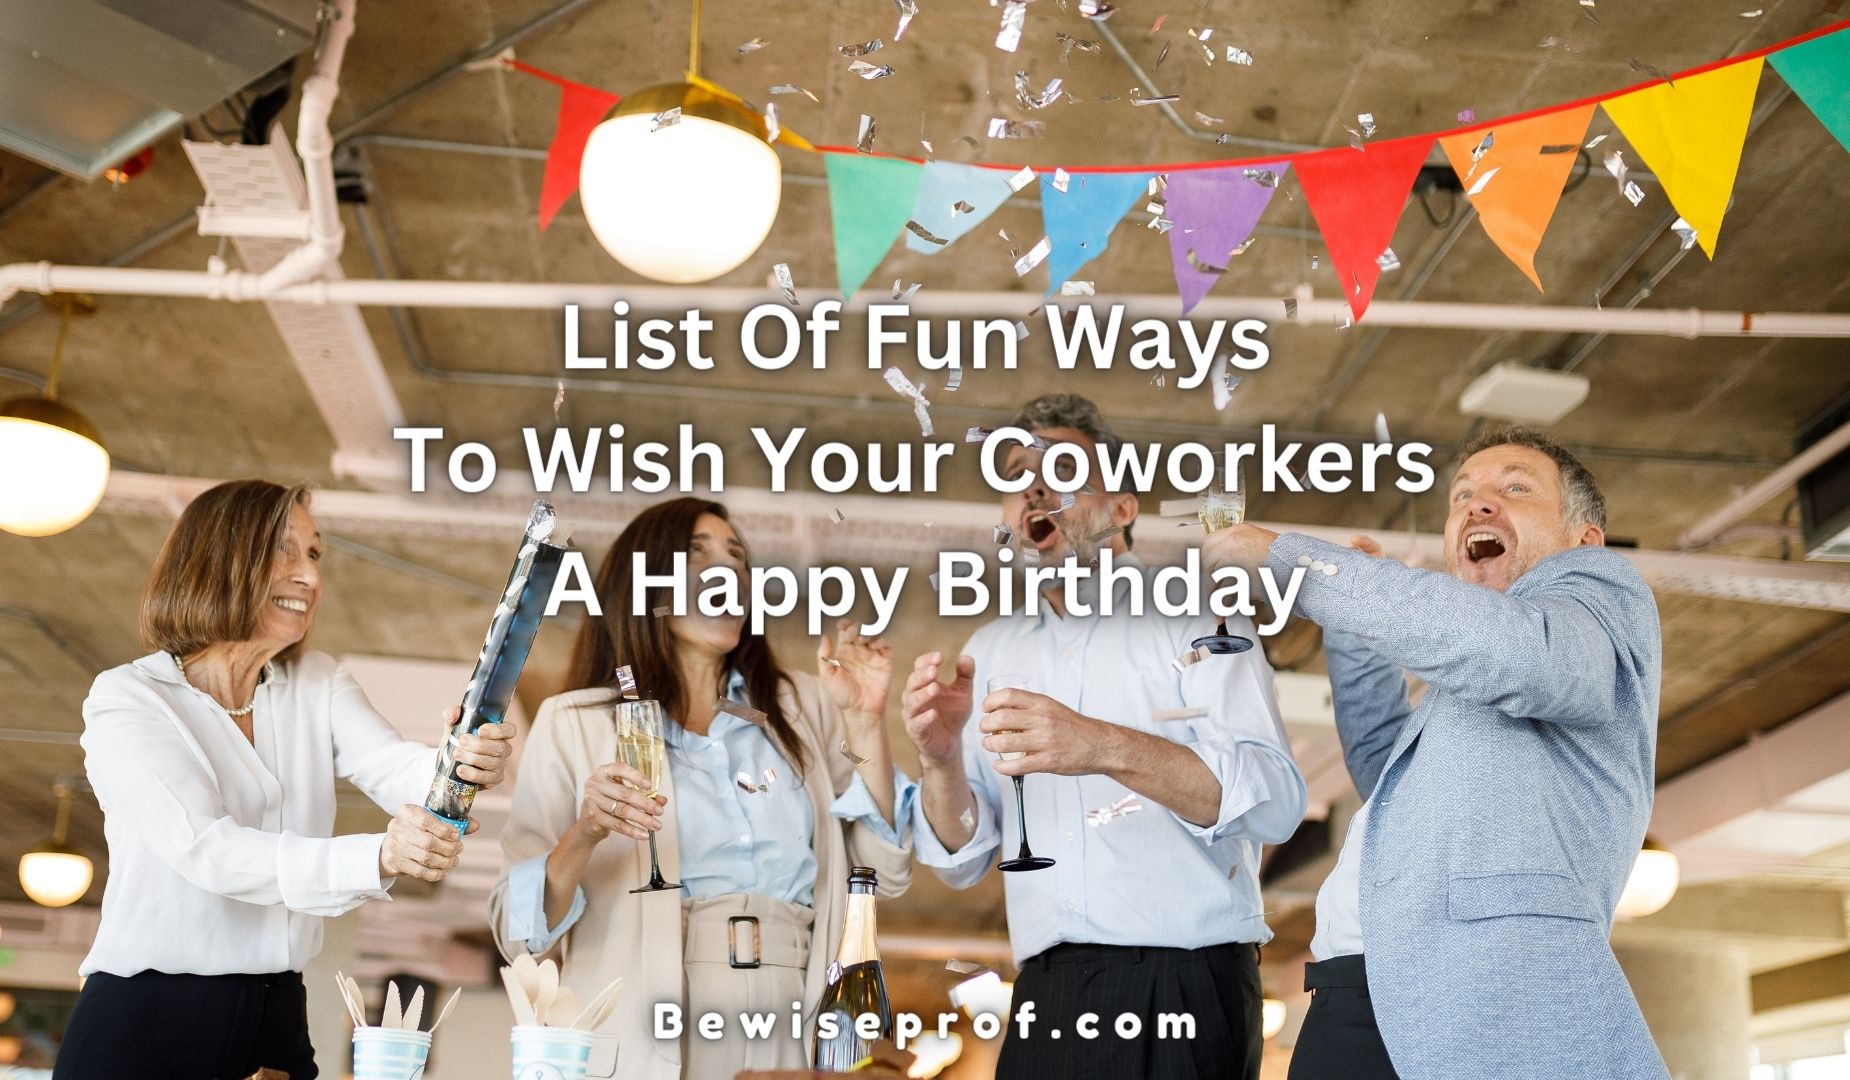 List Of Fun Ways To Wish Your Coworkers A Happy Birthday